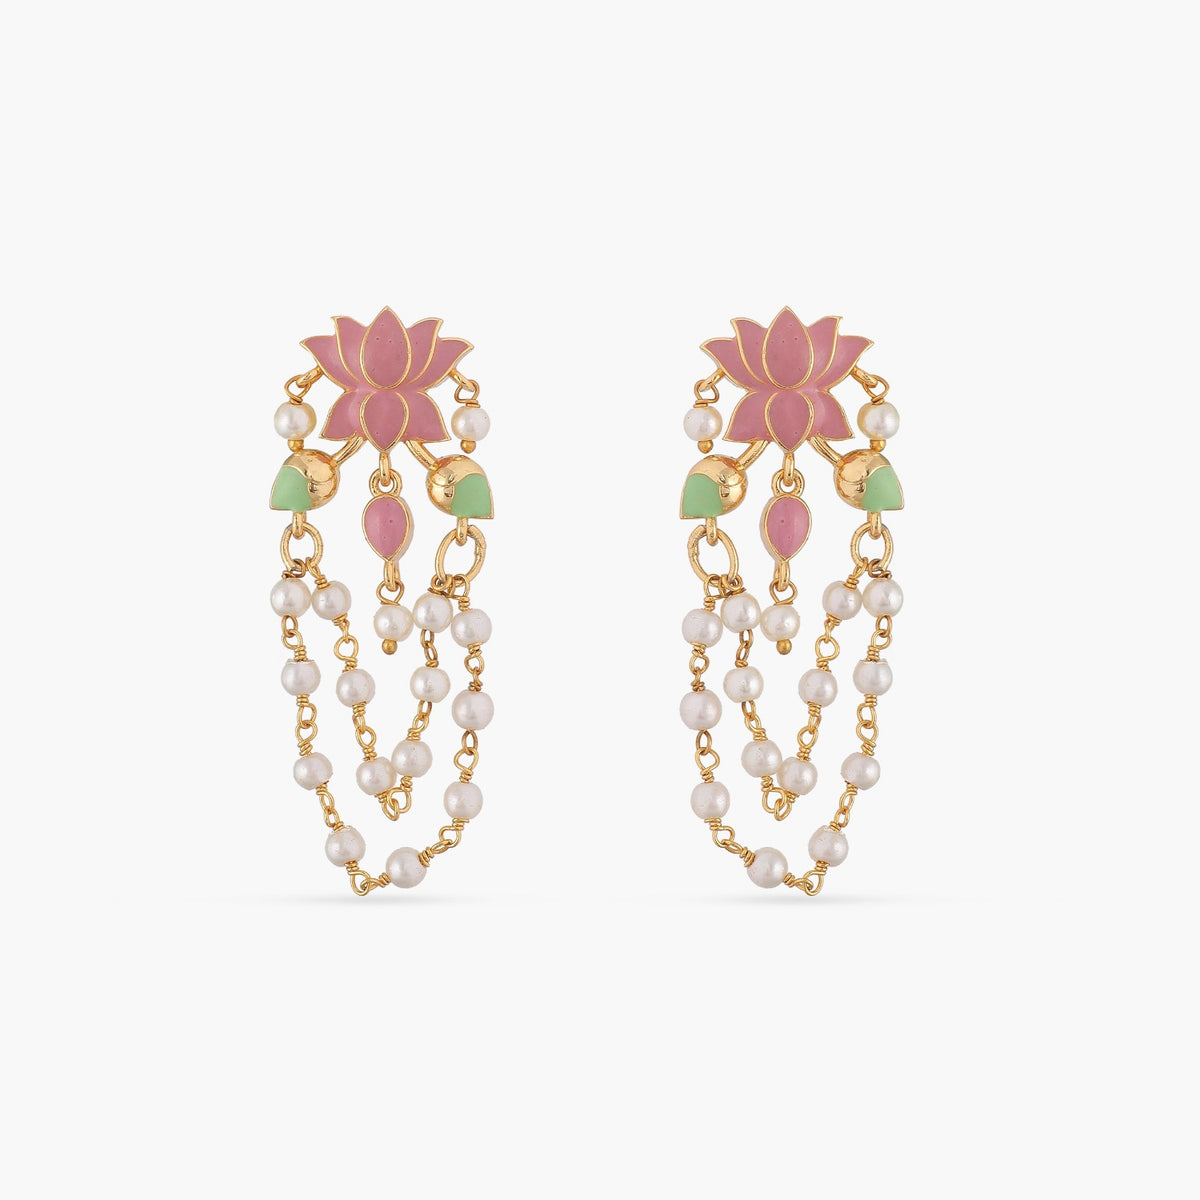 A picture of a pair of Indian artificial pink flower earrings with white pearls.